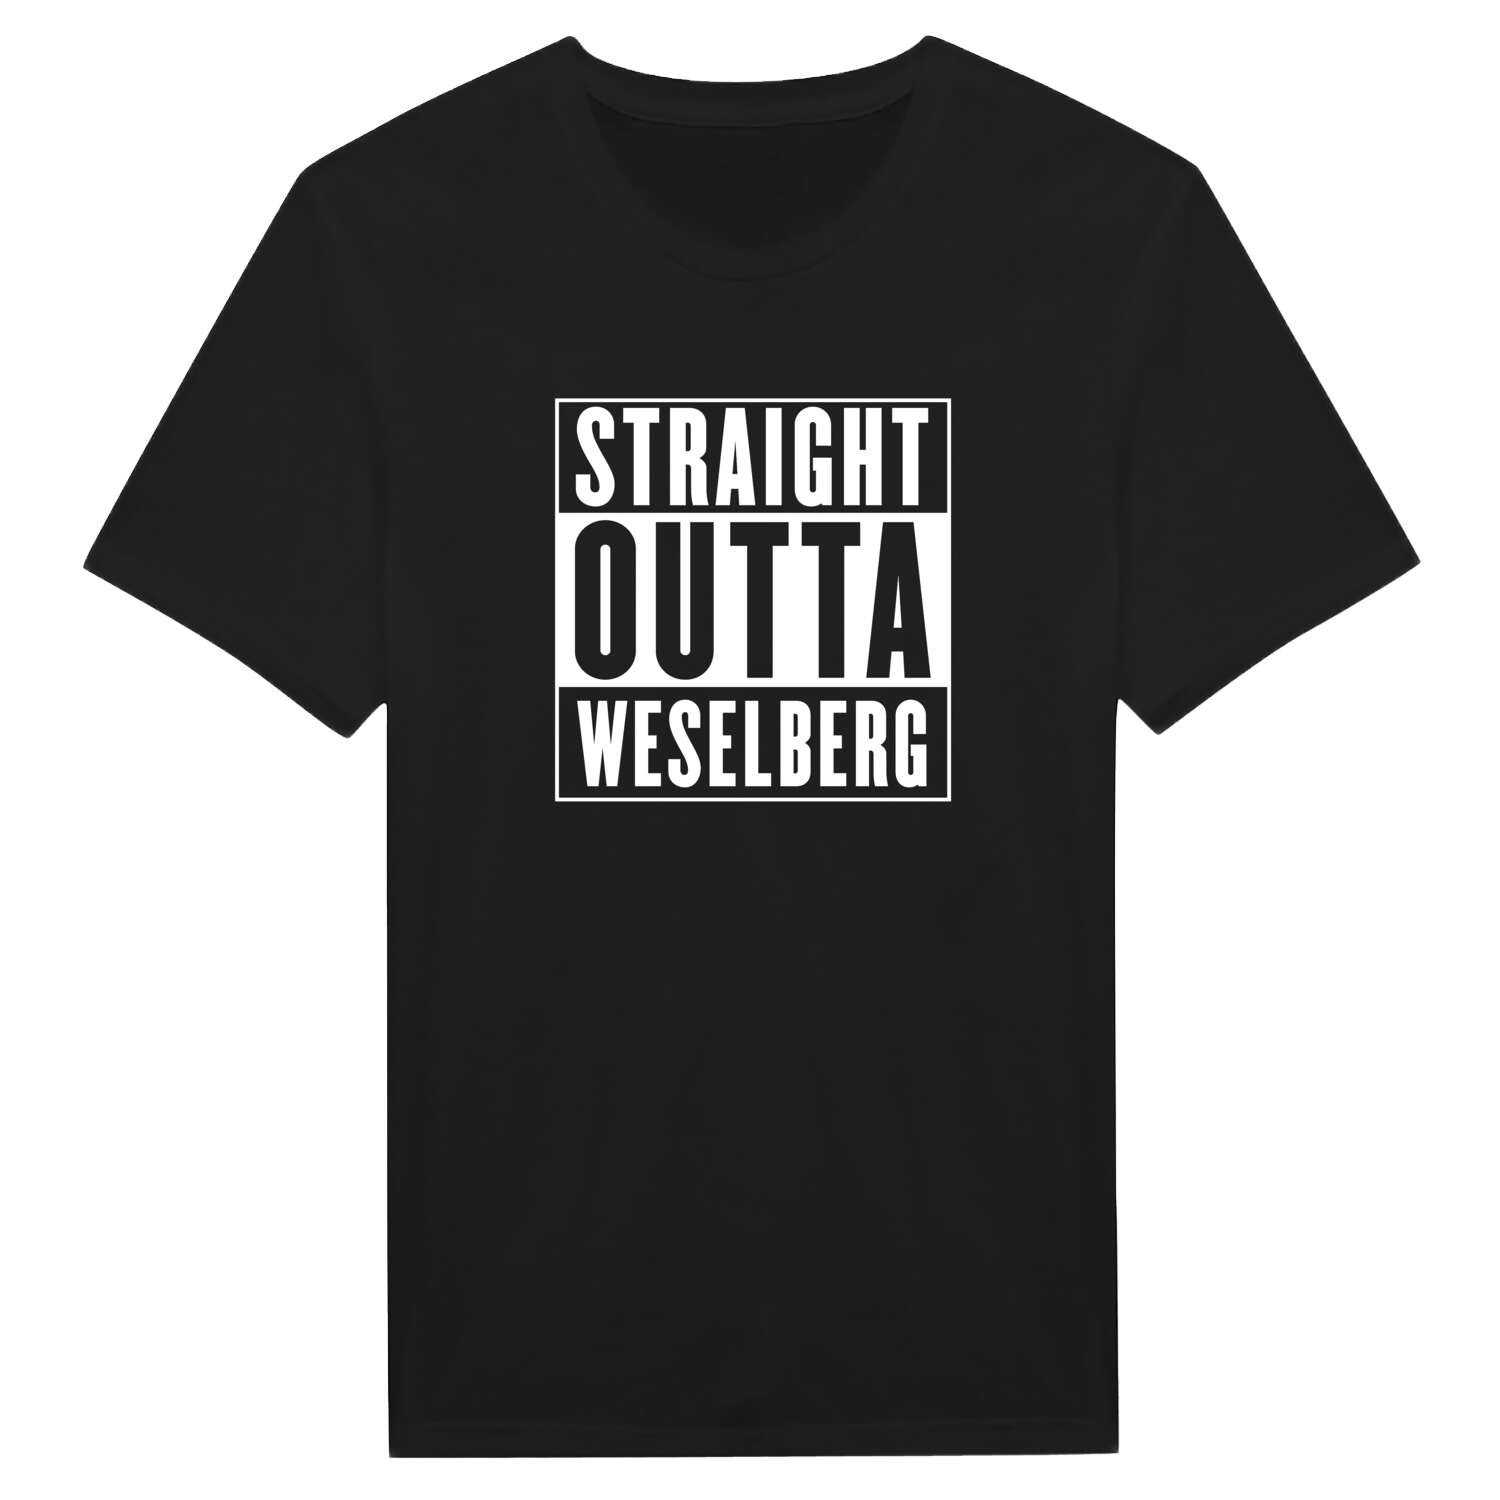 Weselberg T-Shirt »Straight Outta«